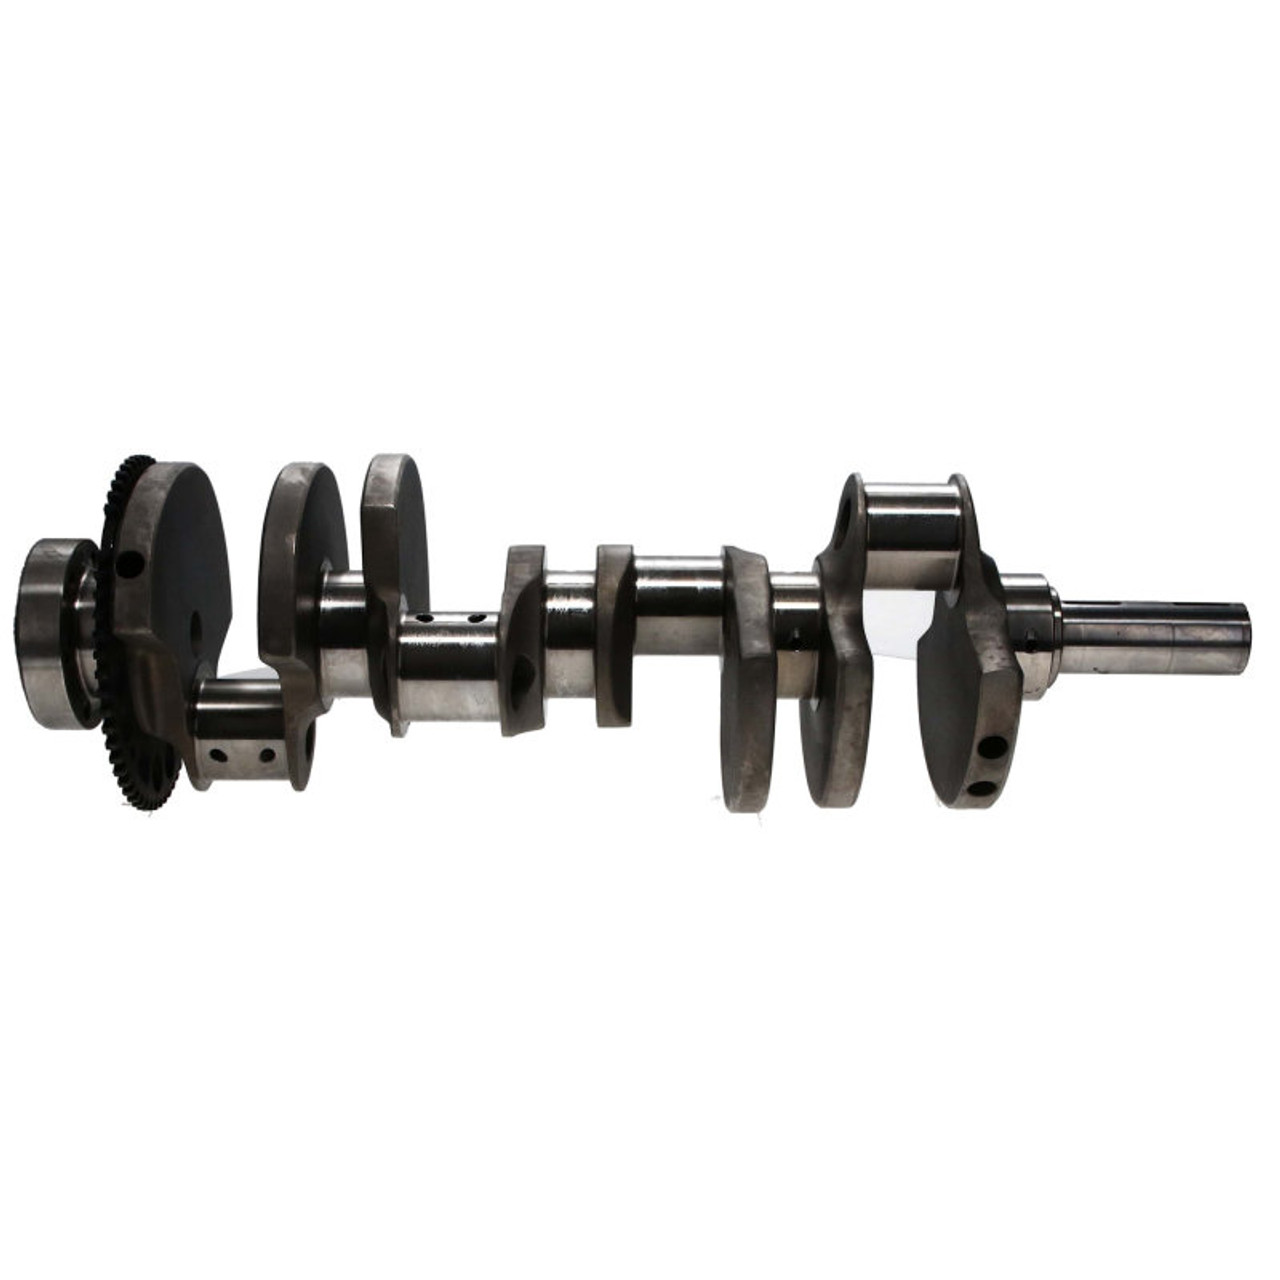 Manley Chevrolet LS 4340 Forged 4.000in Stroke Lightweight Crankshaft w/ 58 Tooth Reluctor Wheel - 192158 User 3